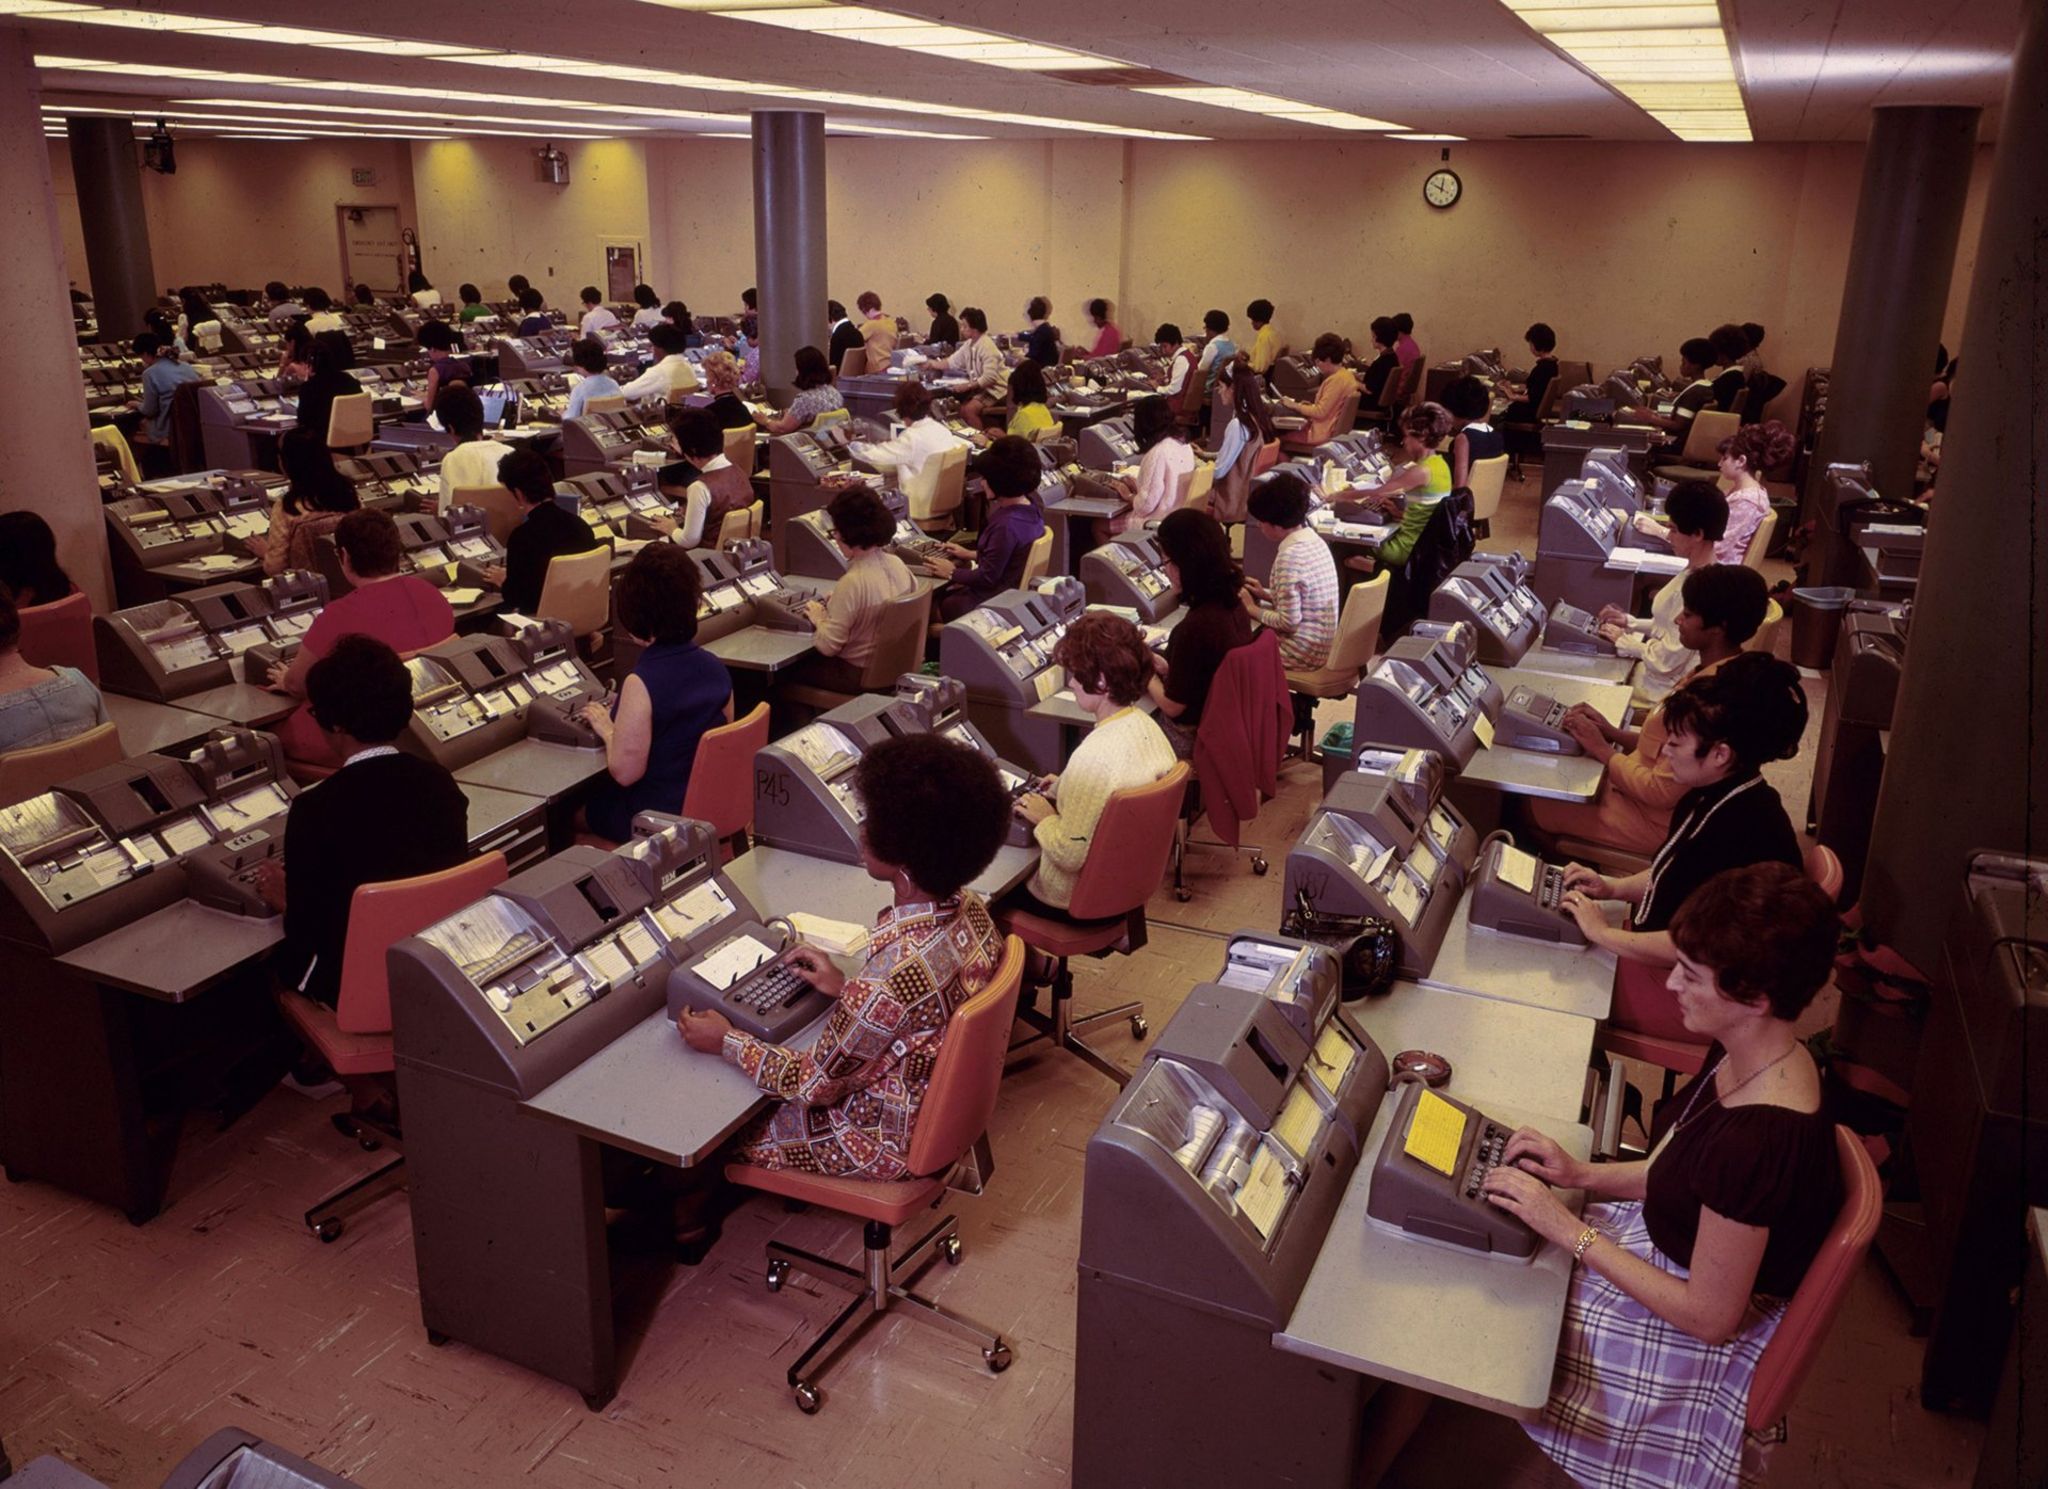 Women at work in the book-keeping room at the Bank of America, Los Angeles circa 1970